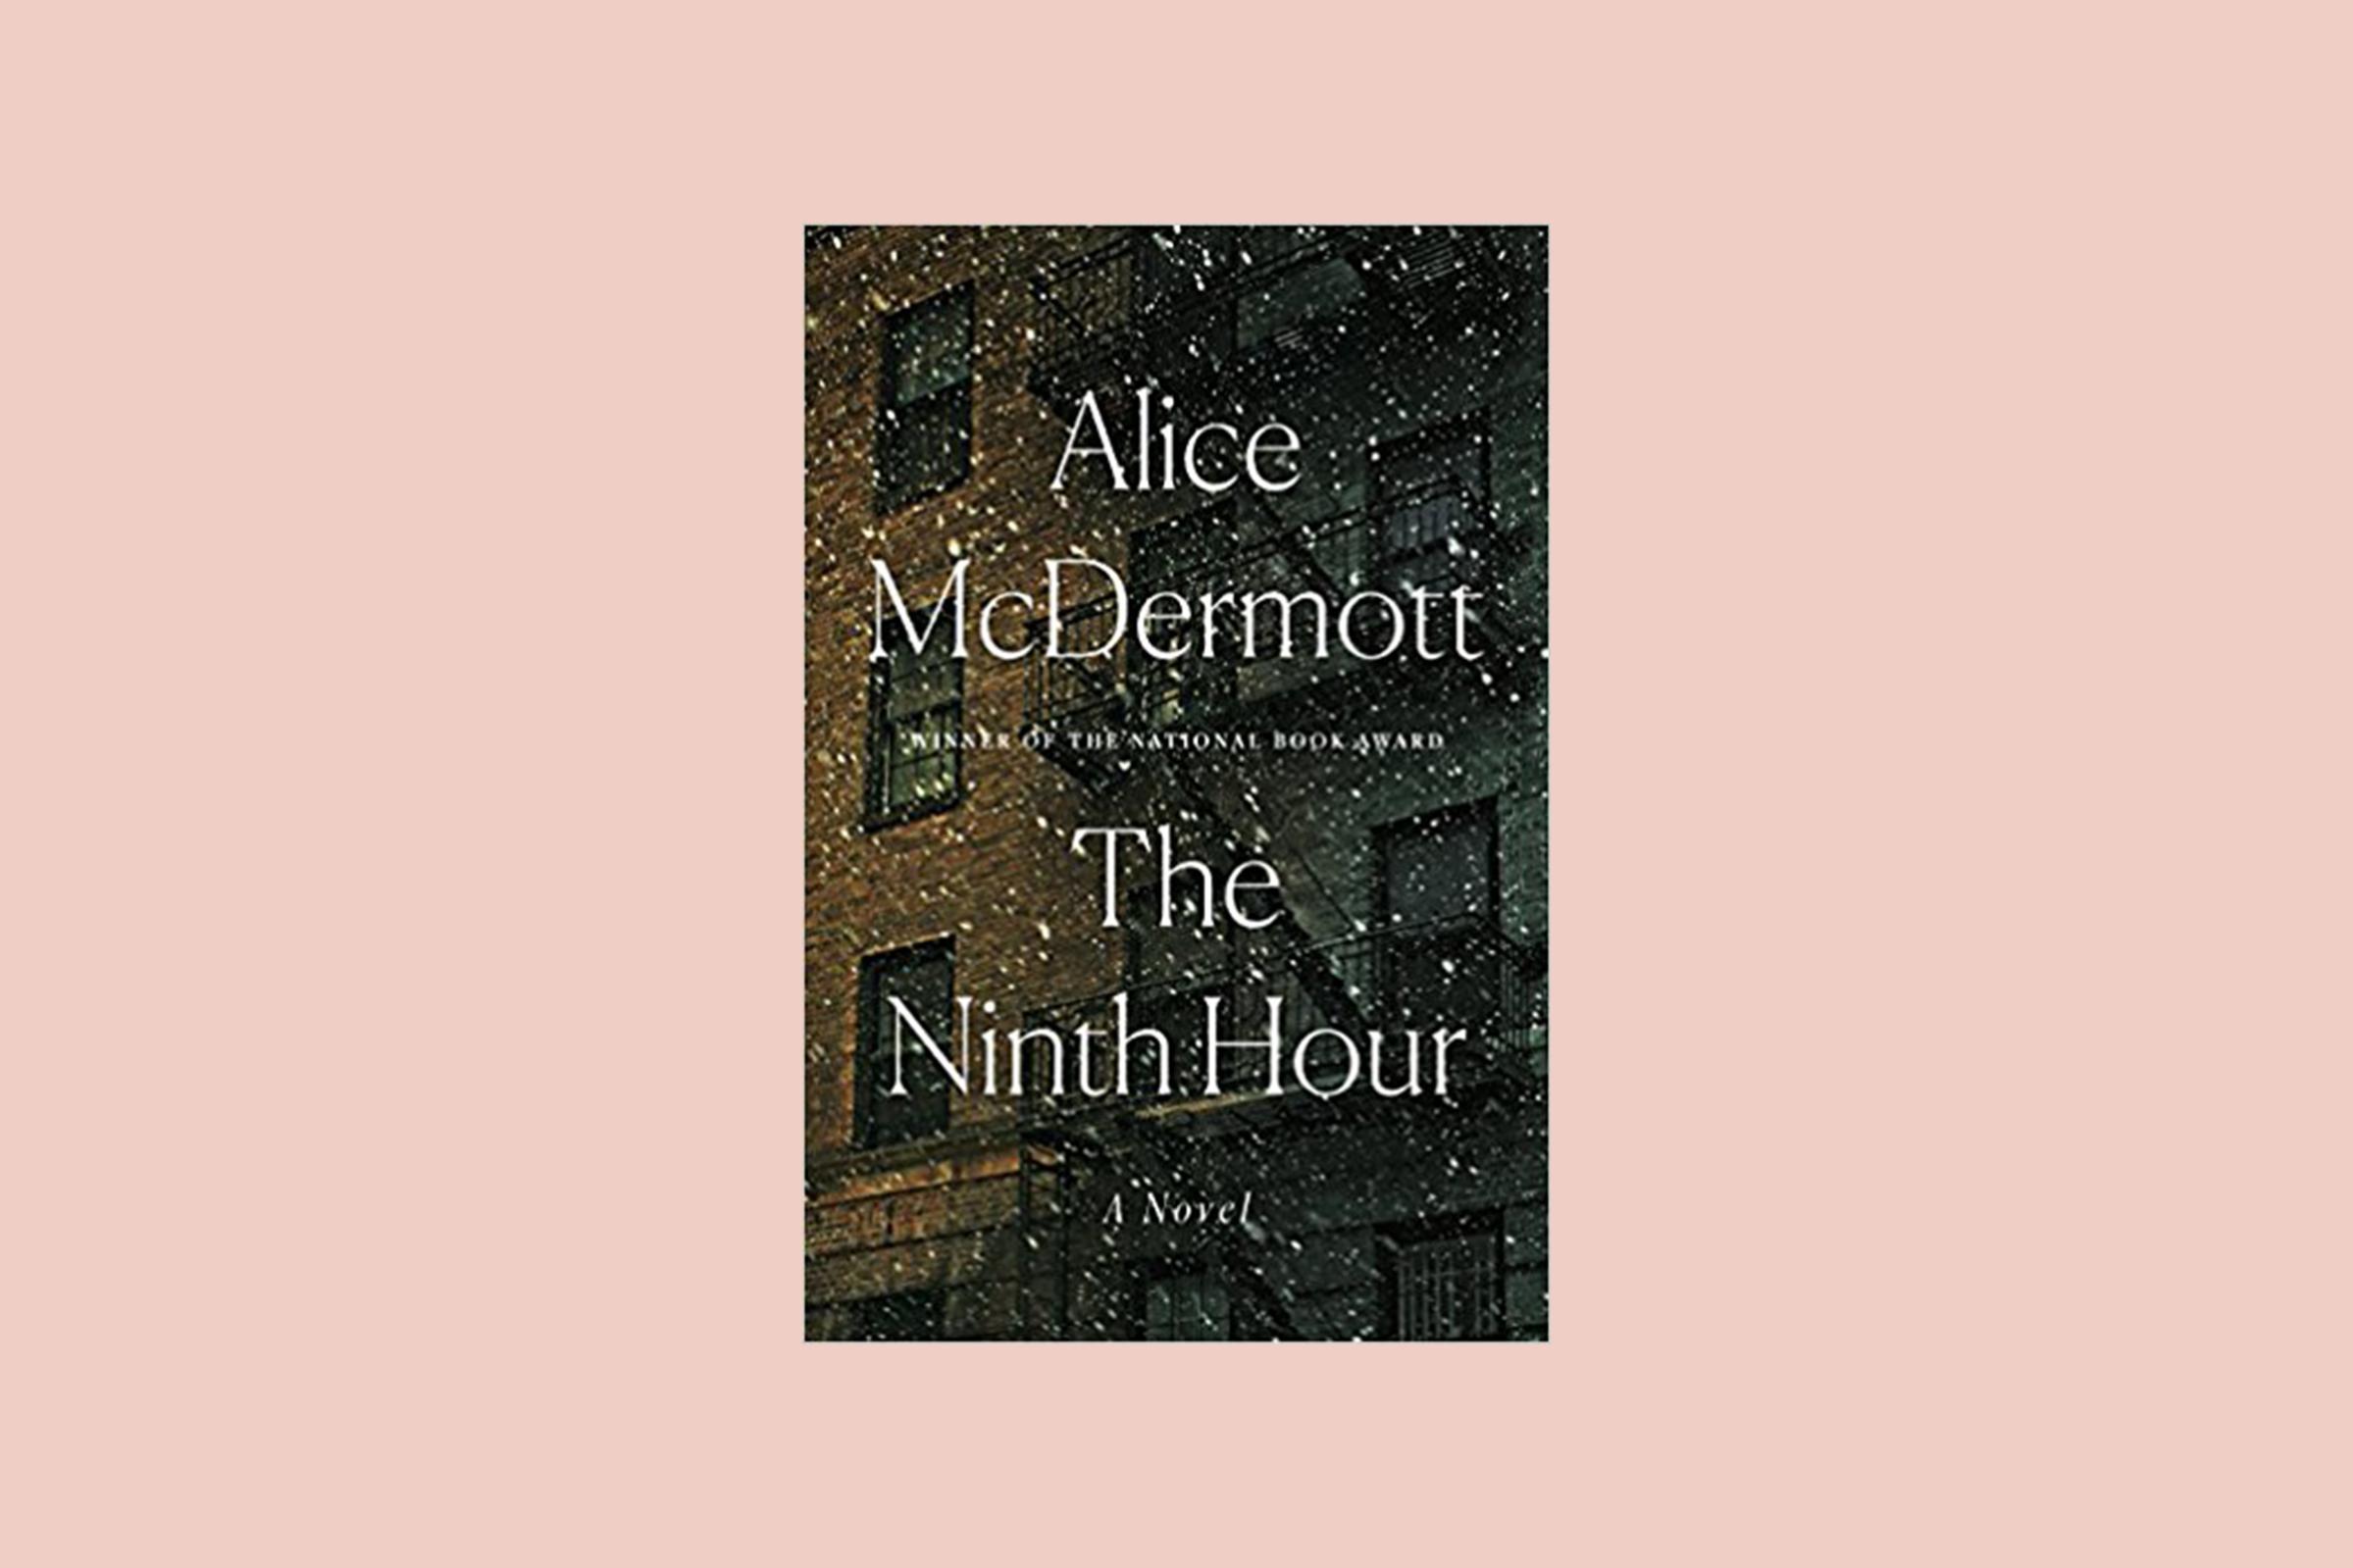 The Ninth Hour is one of the top 10 novels of 2017